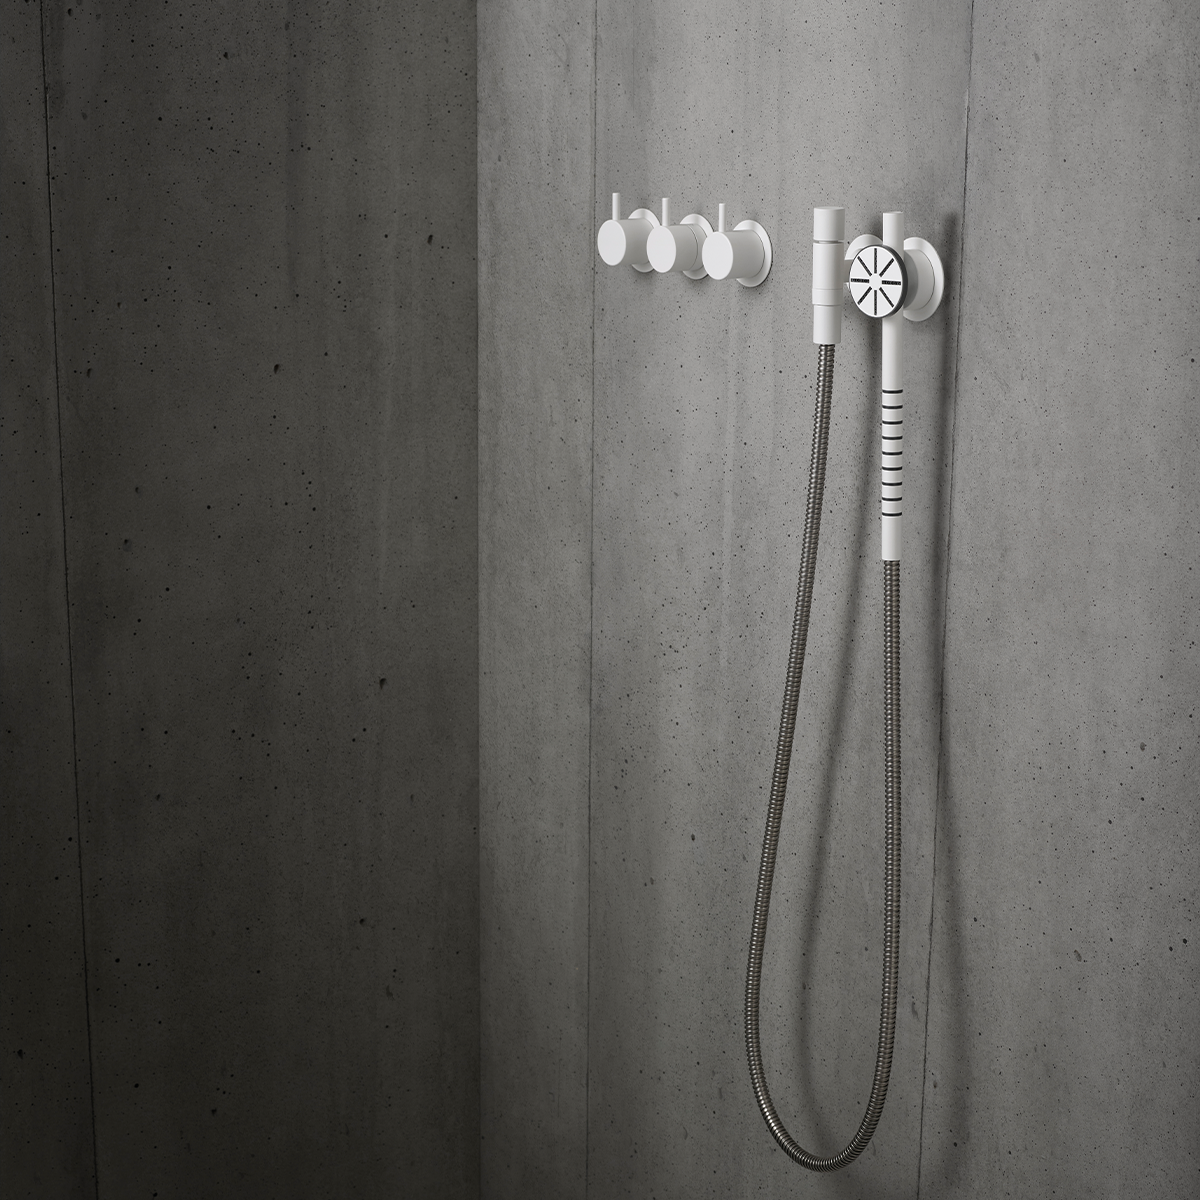 Vola 5471S-061 Thermostatic Shower Mixer